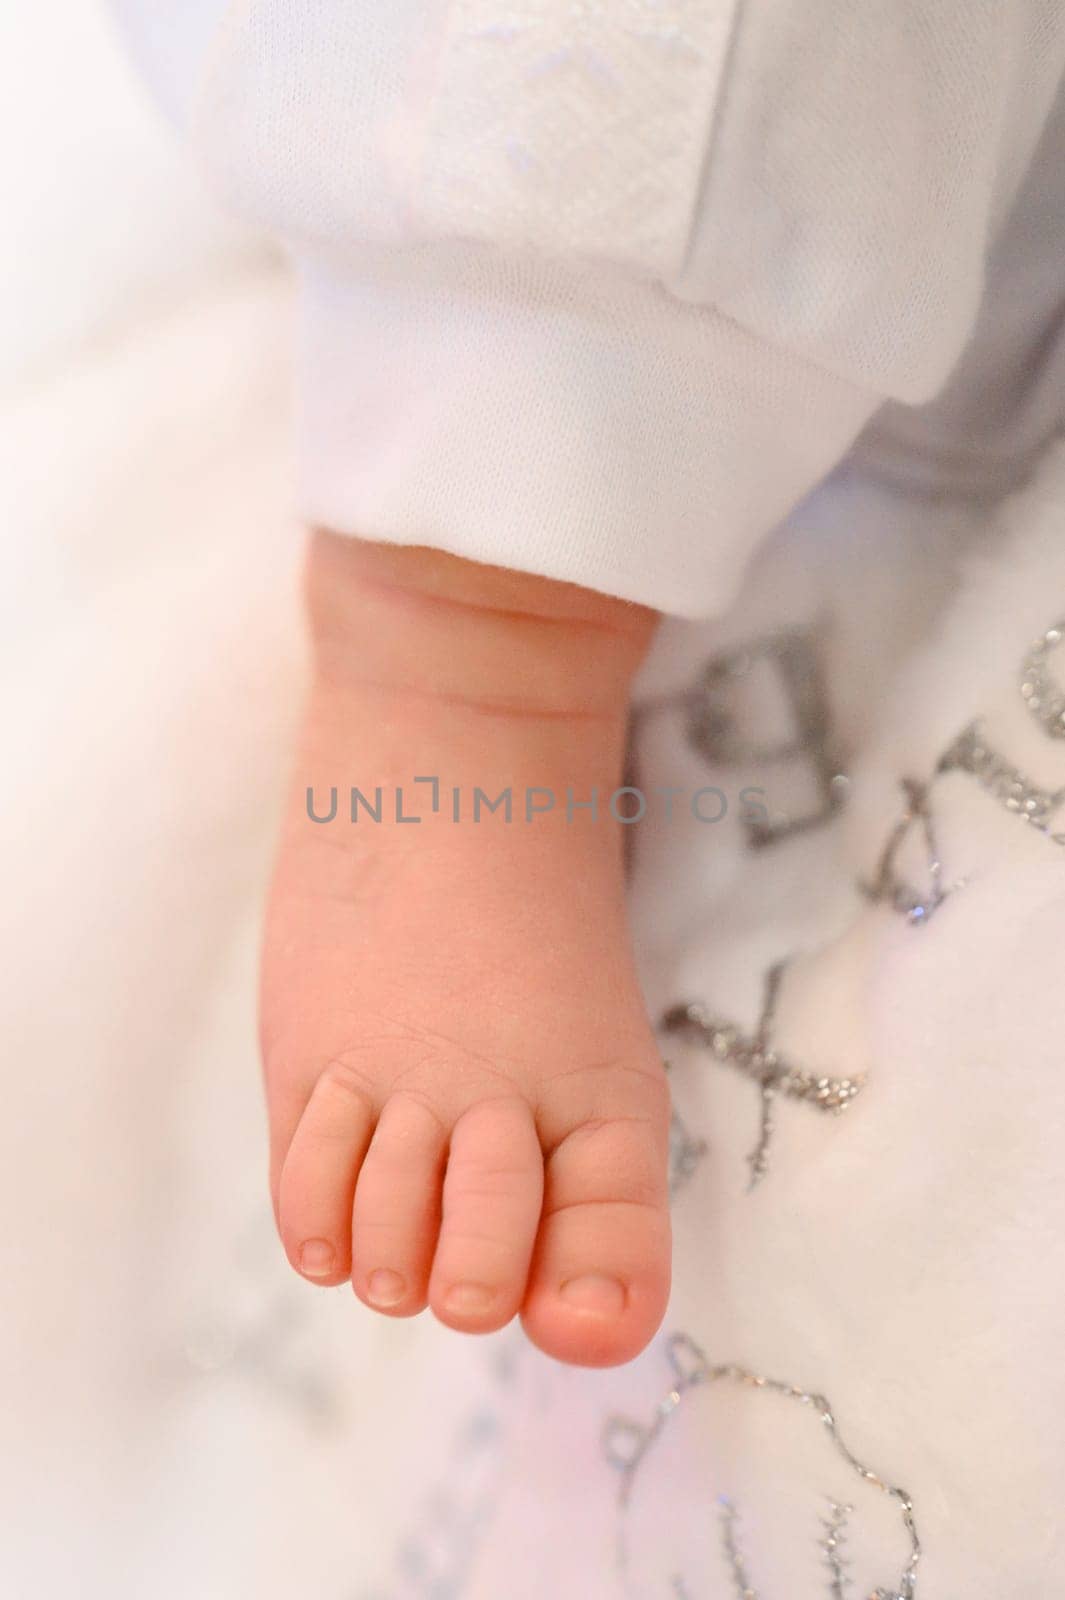 A baby's small leg during baptism on a white sheet, newborn baby.